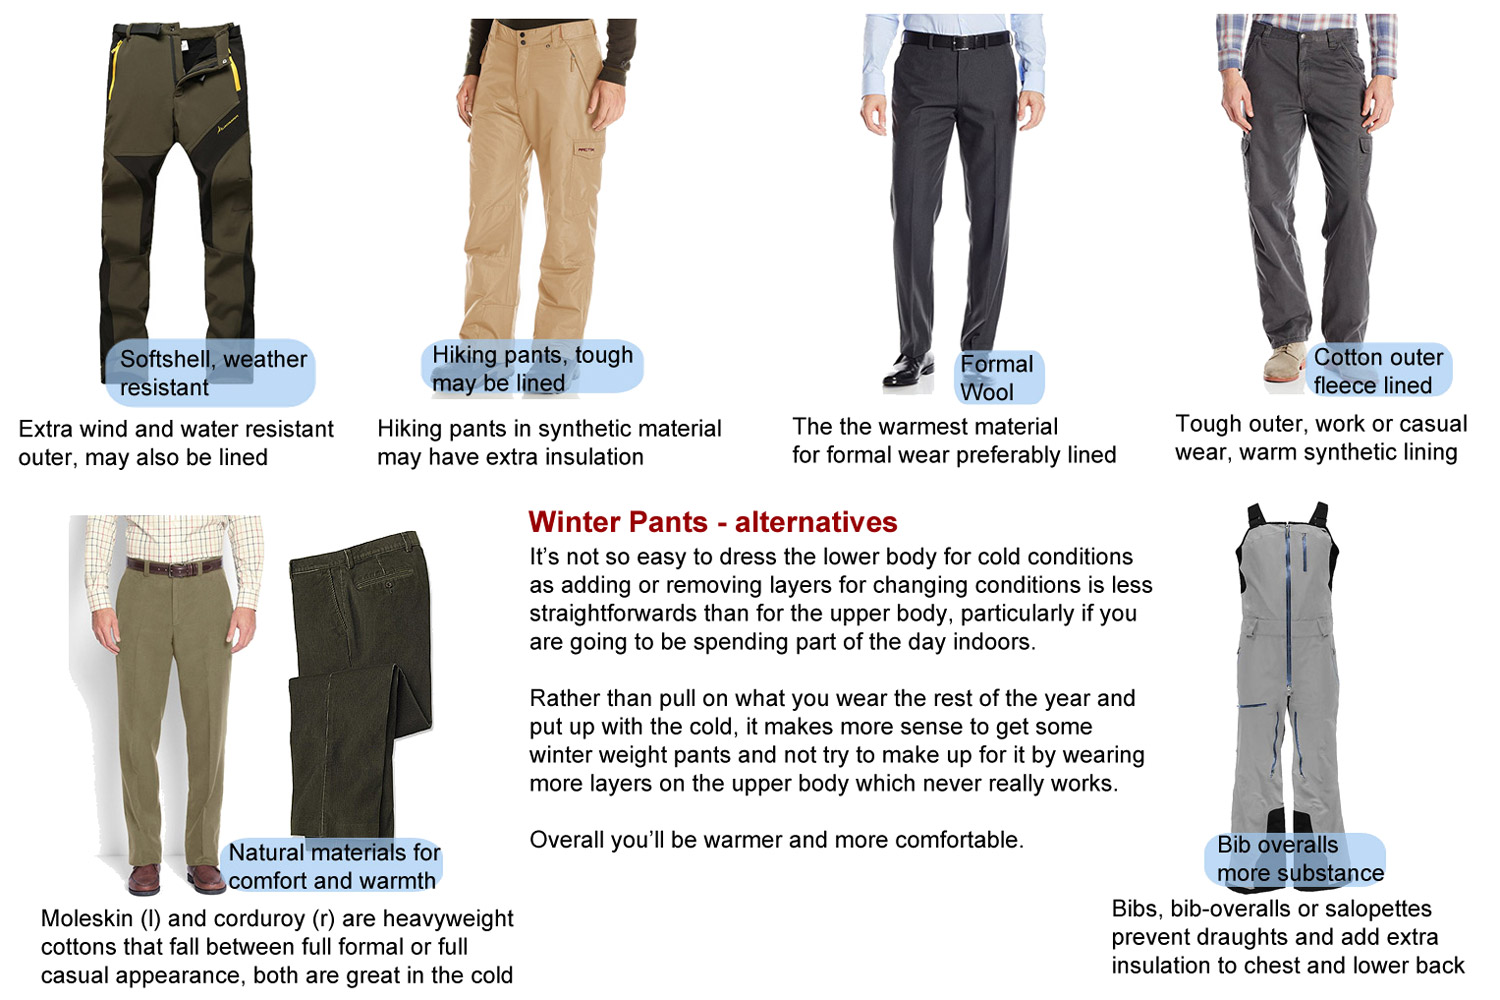 Cold Climate Pants - insulated clothing for winter weather, 2023